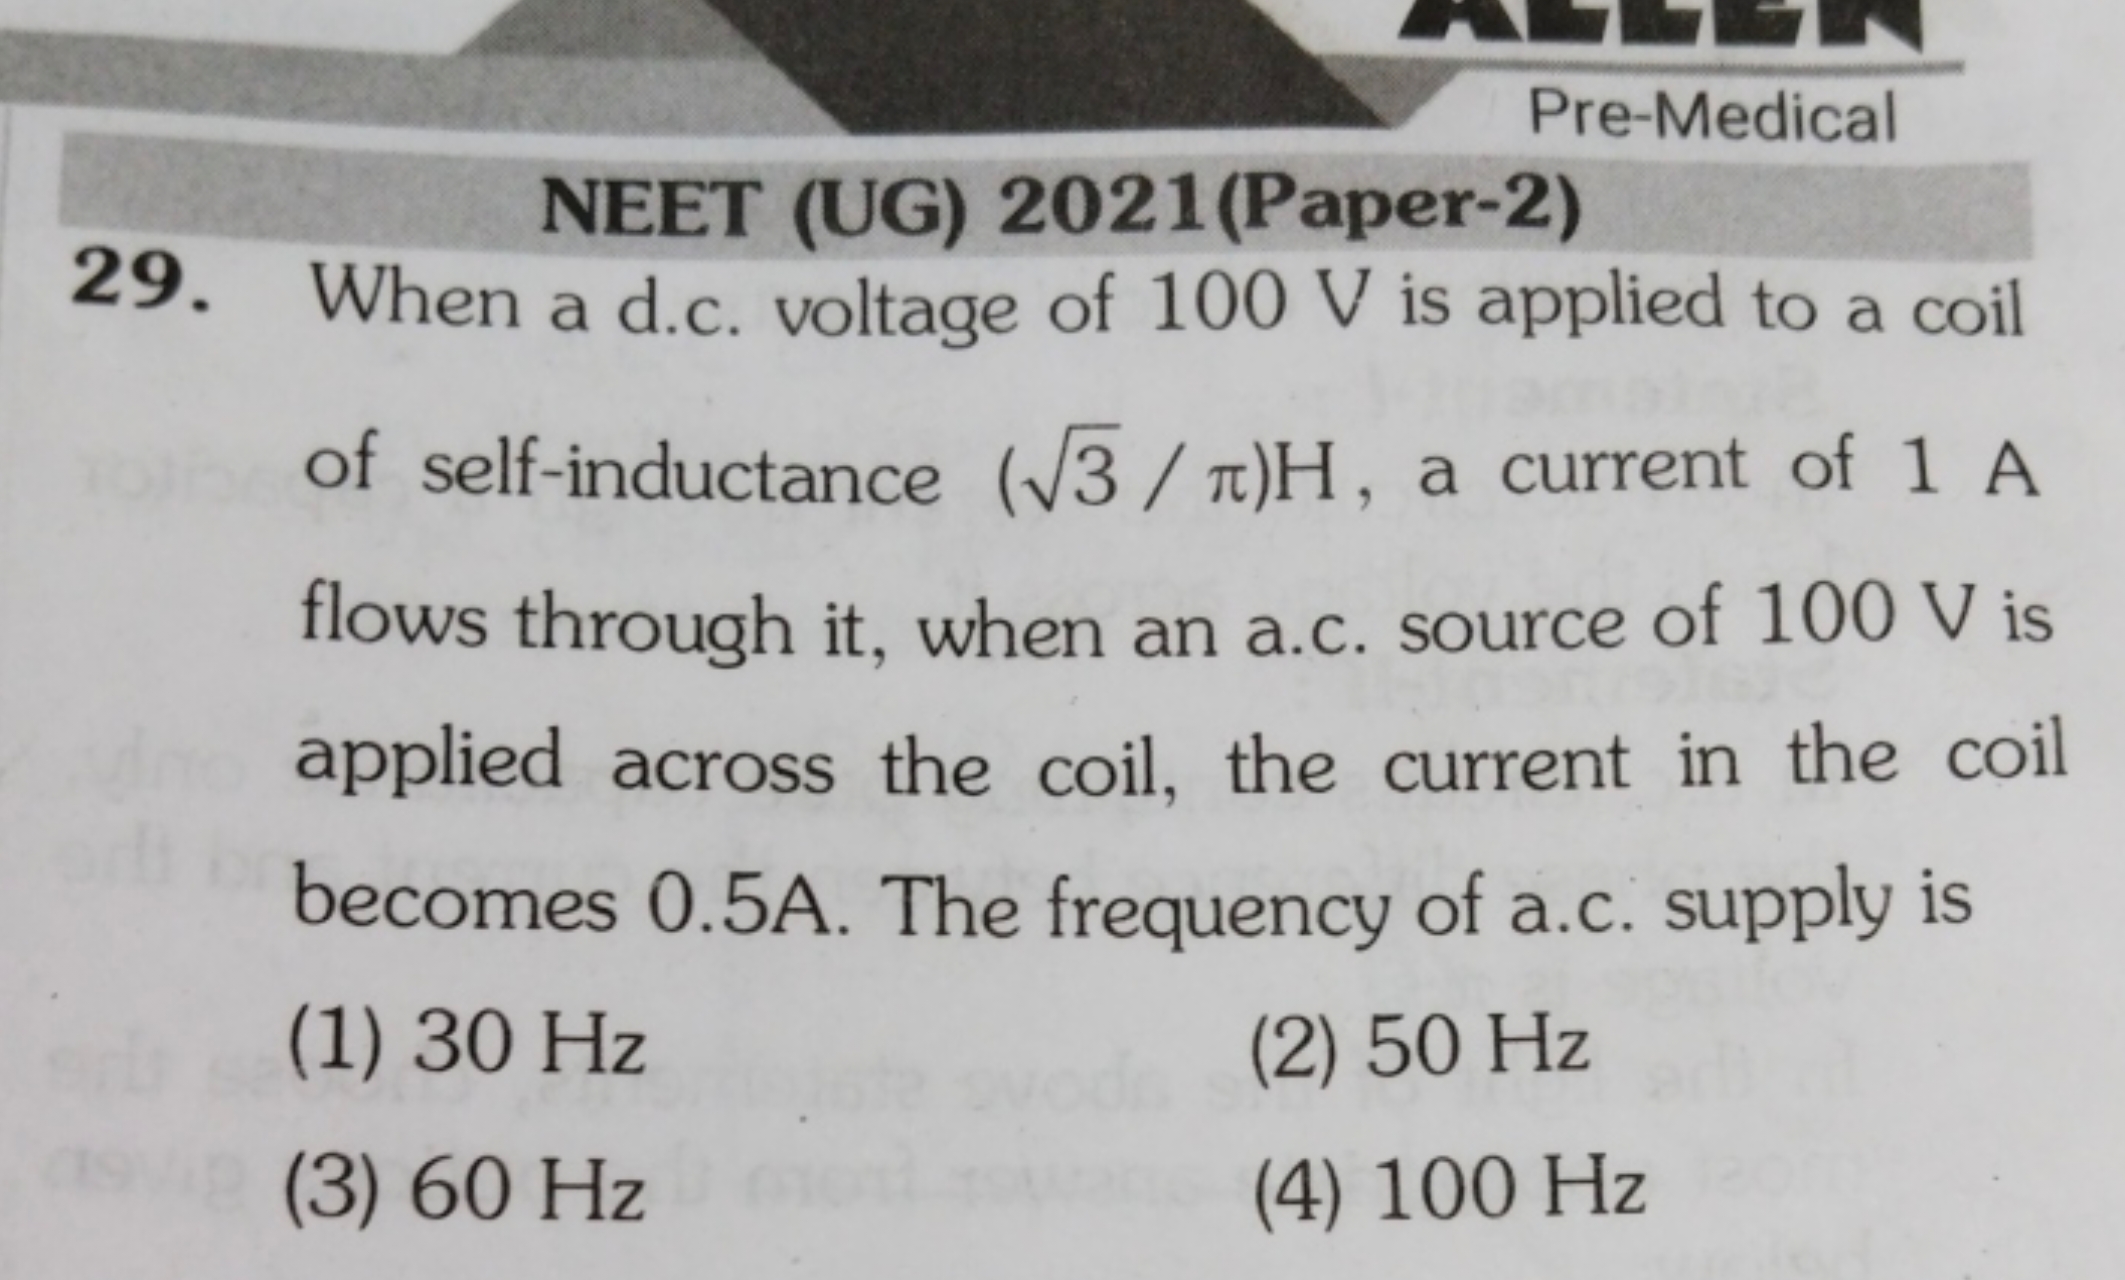 NEET (UG) 2021 (Paper-2) 29. When a d.c. voltage of 100 V is applied t